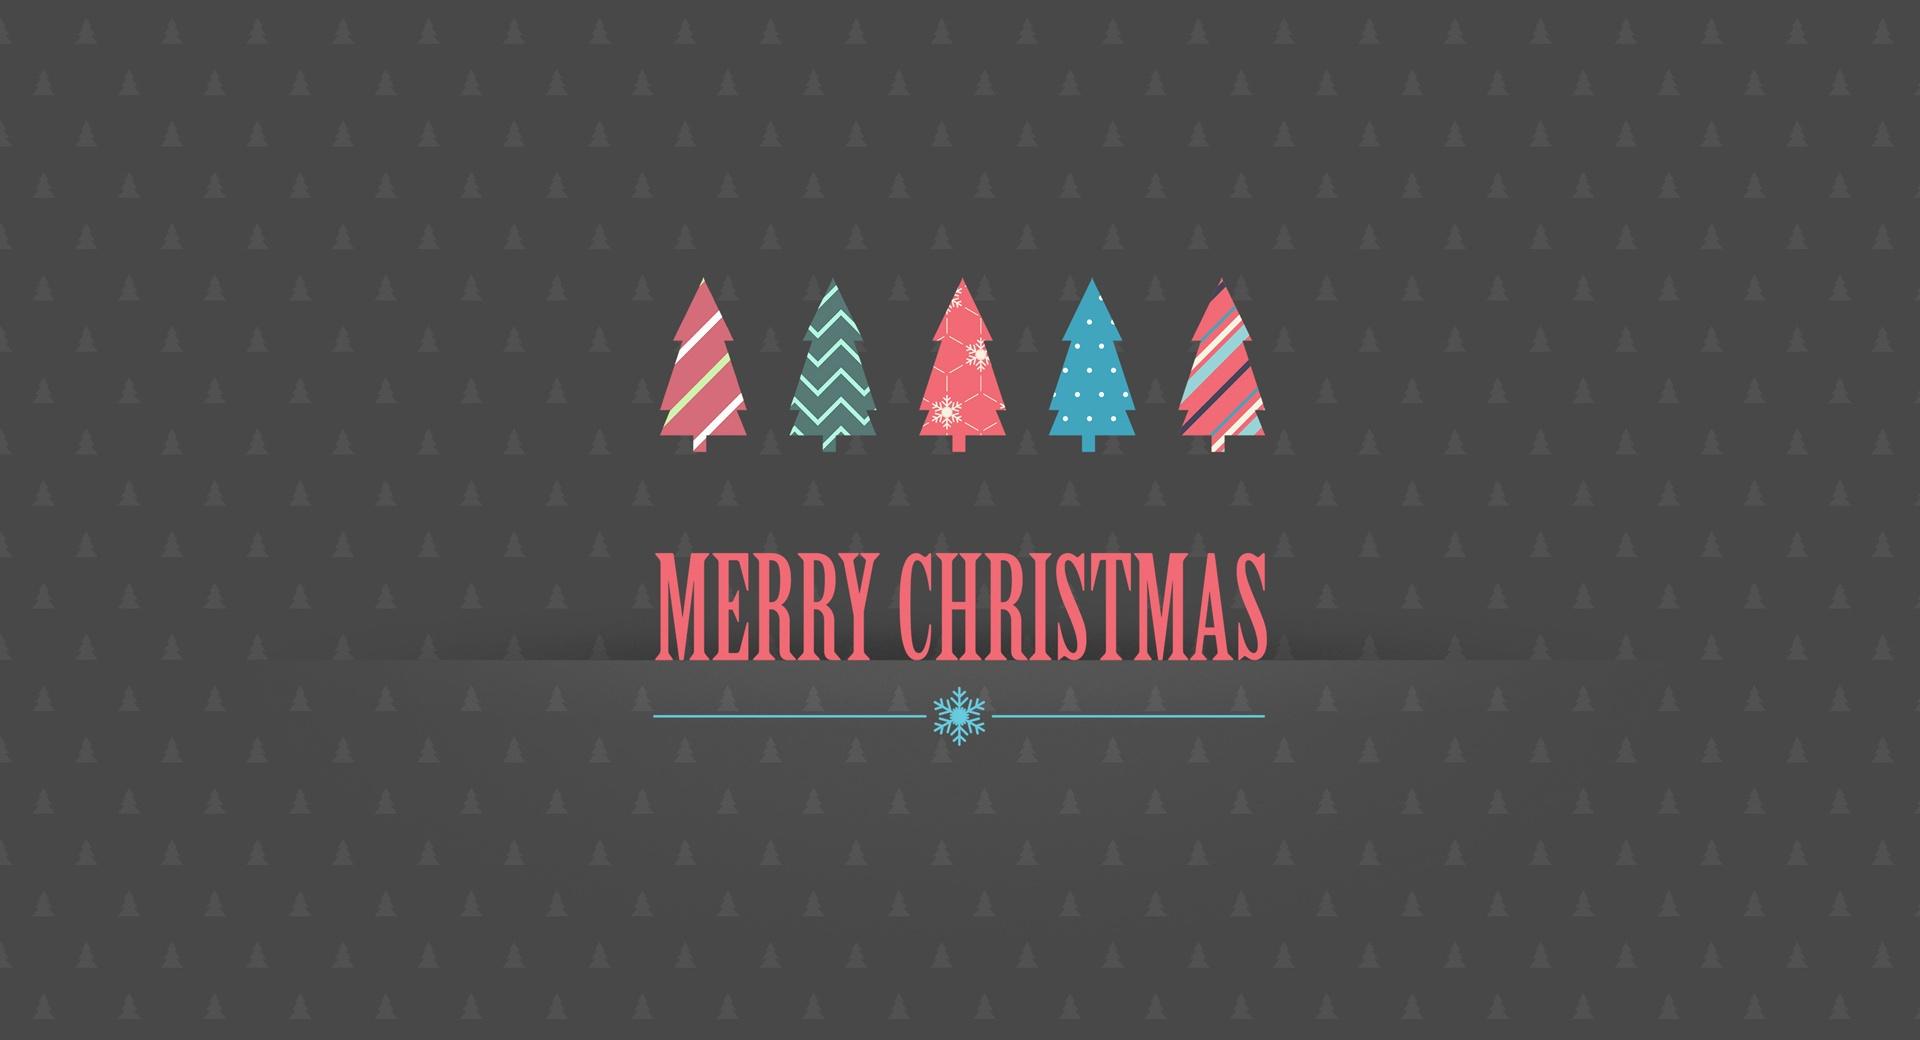 Merry Christmas by PimpYourScreen wallpapers HD quality